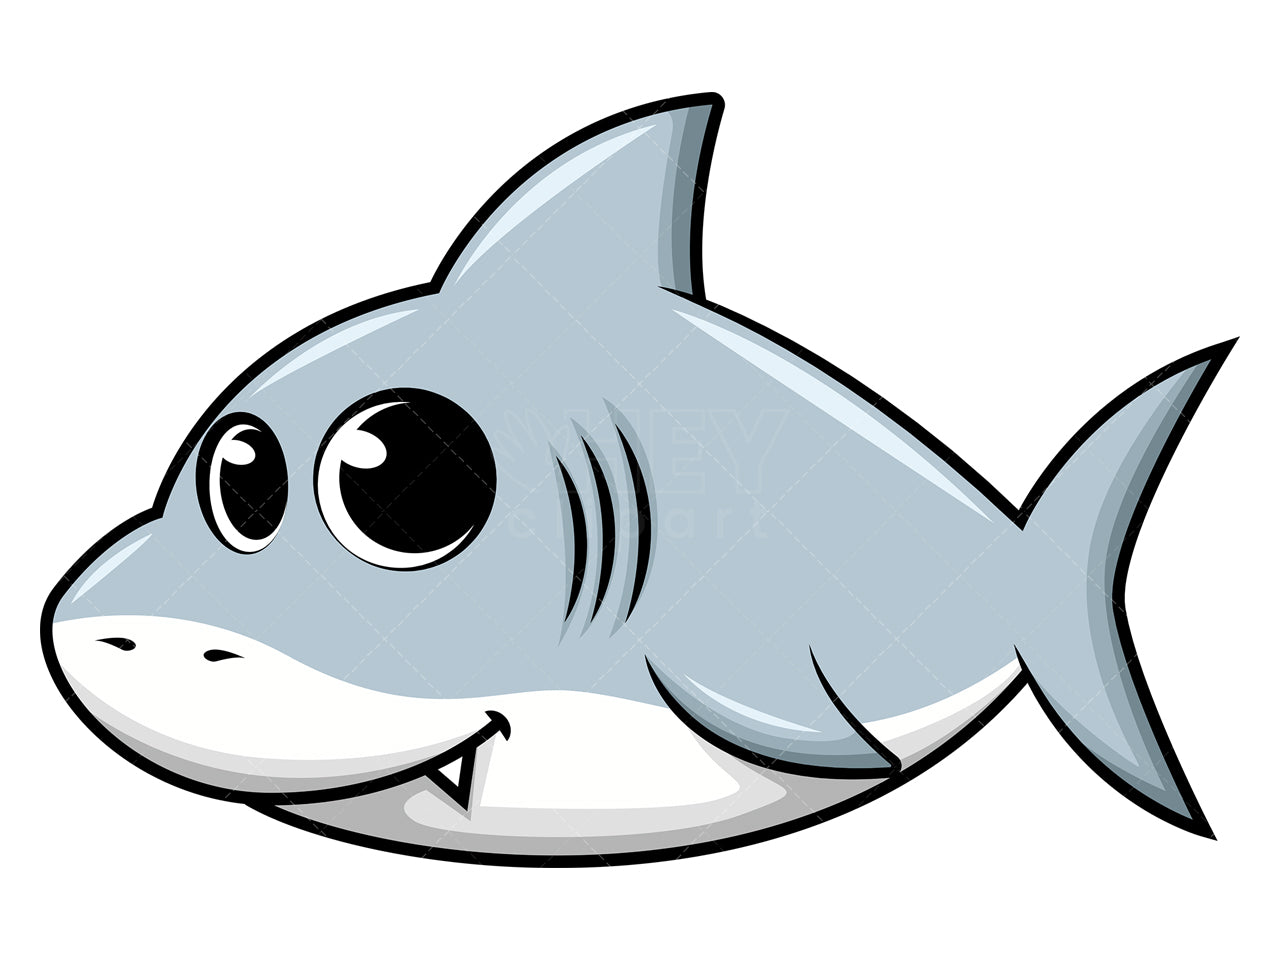 Royalty-free stock vector illustration of  a cute baby shark.